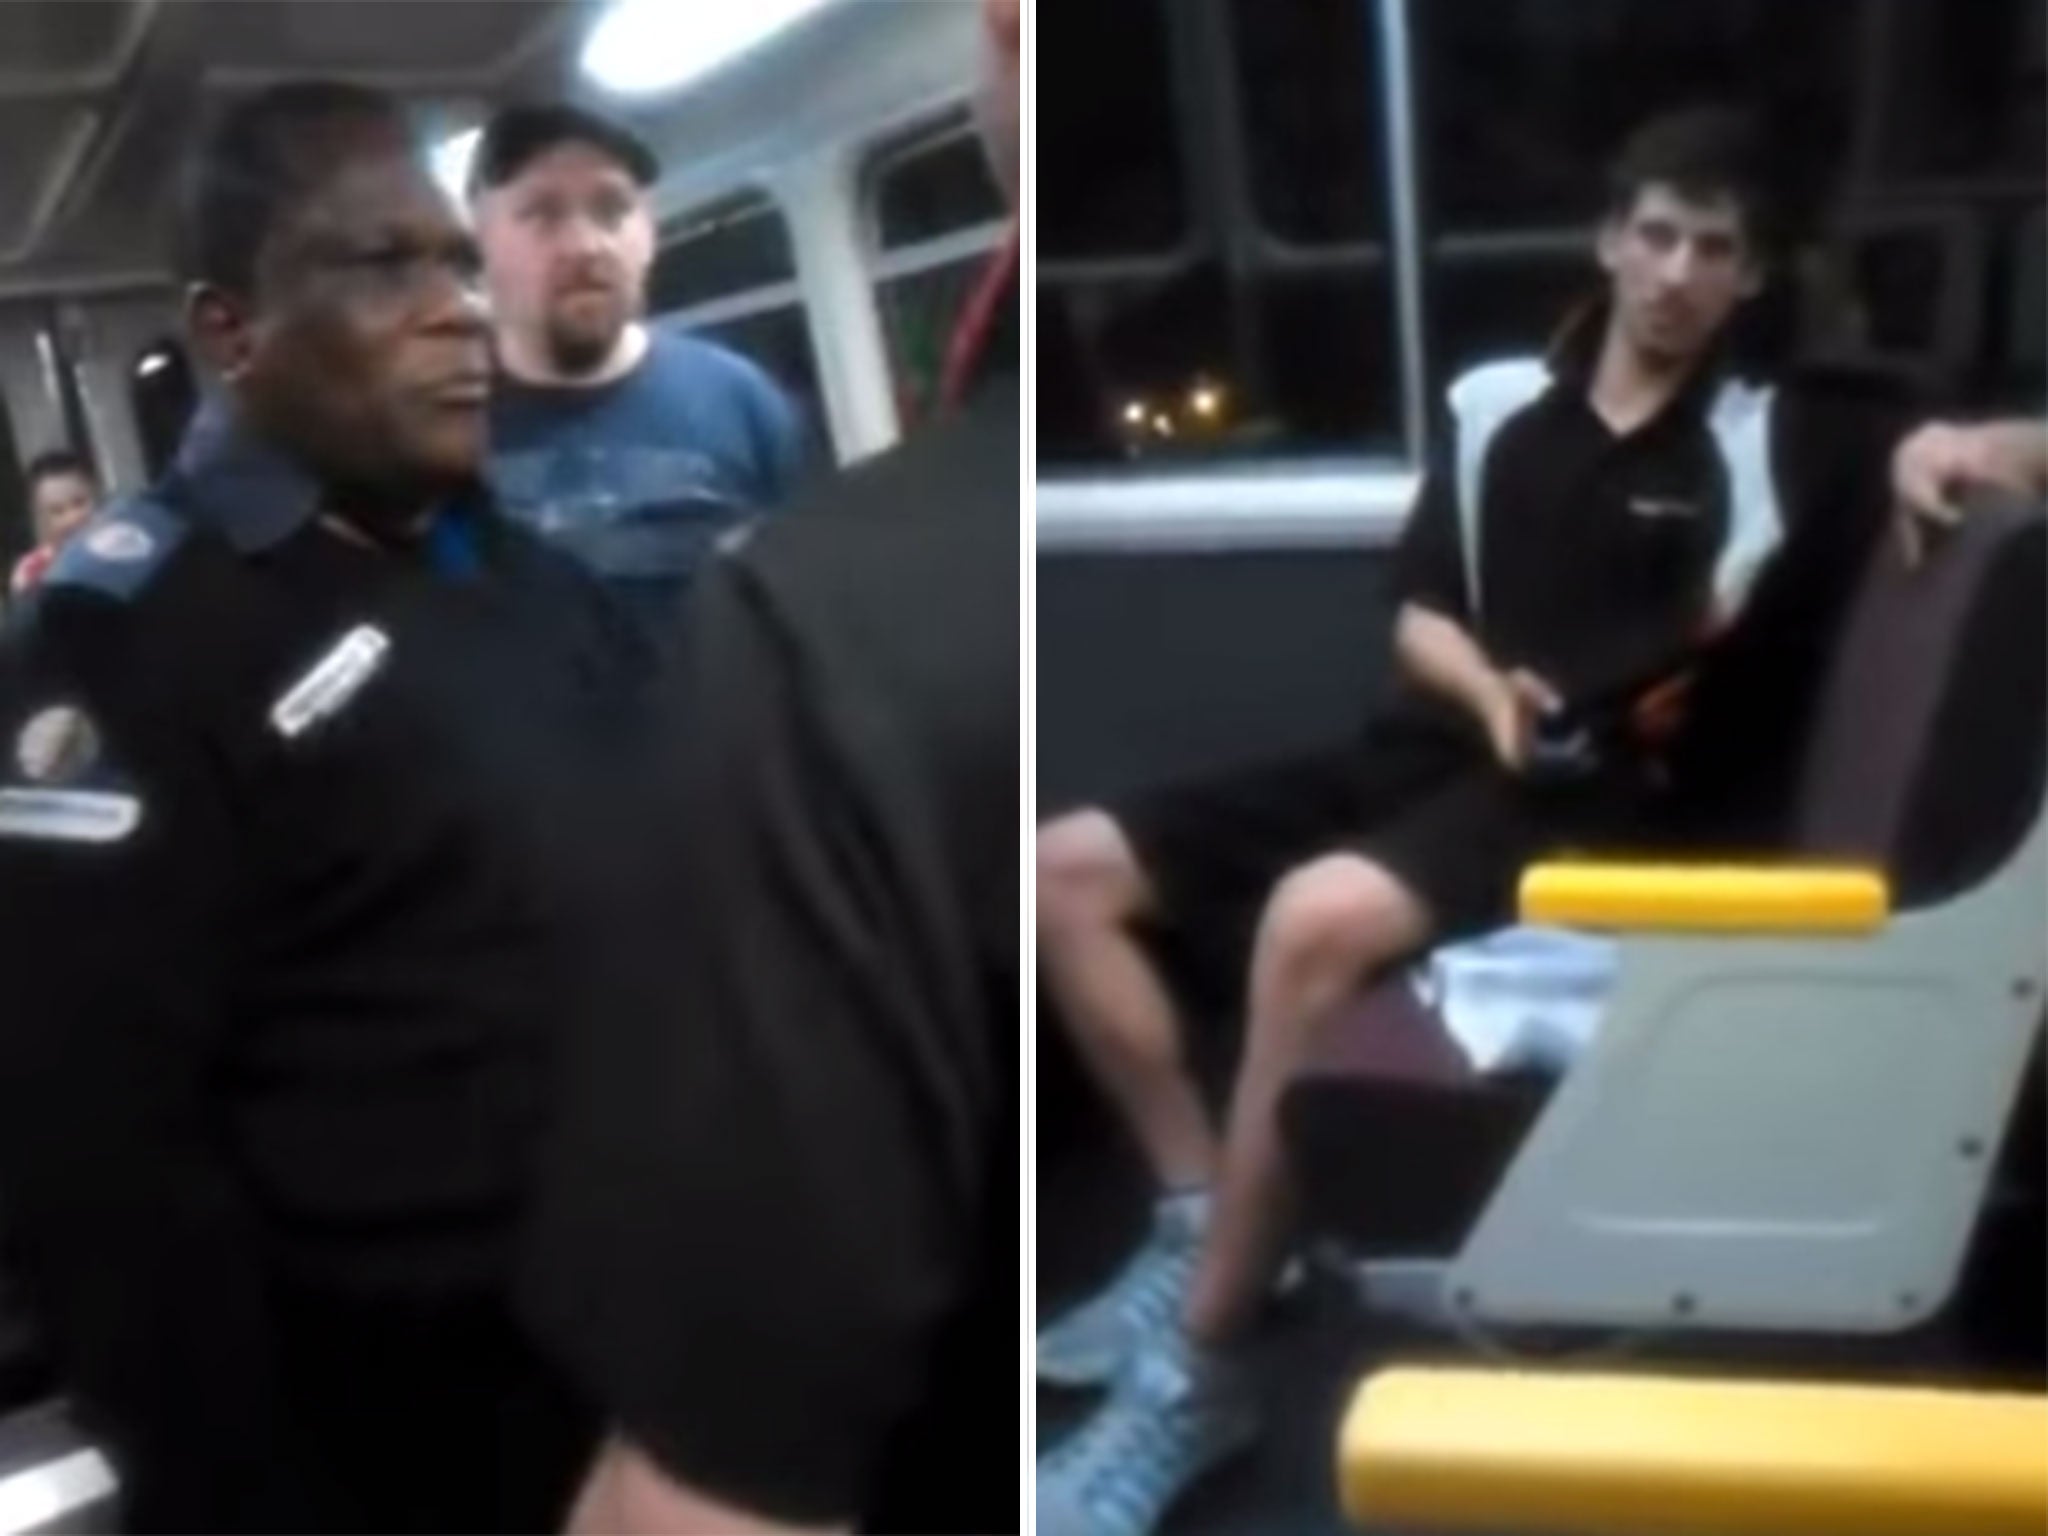 The video shows a young man in a prolonged racist rant against a train guard